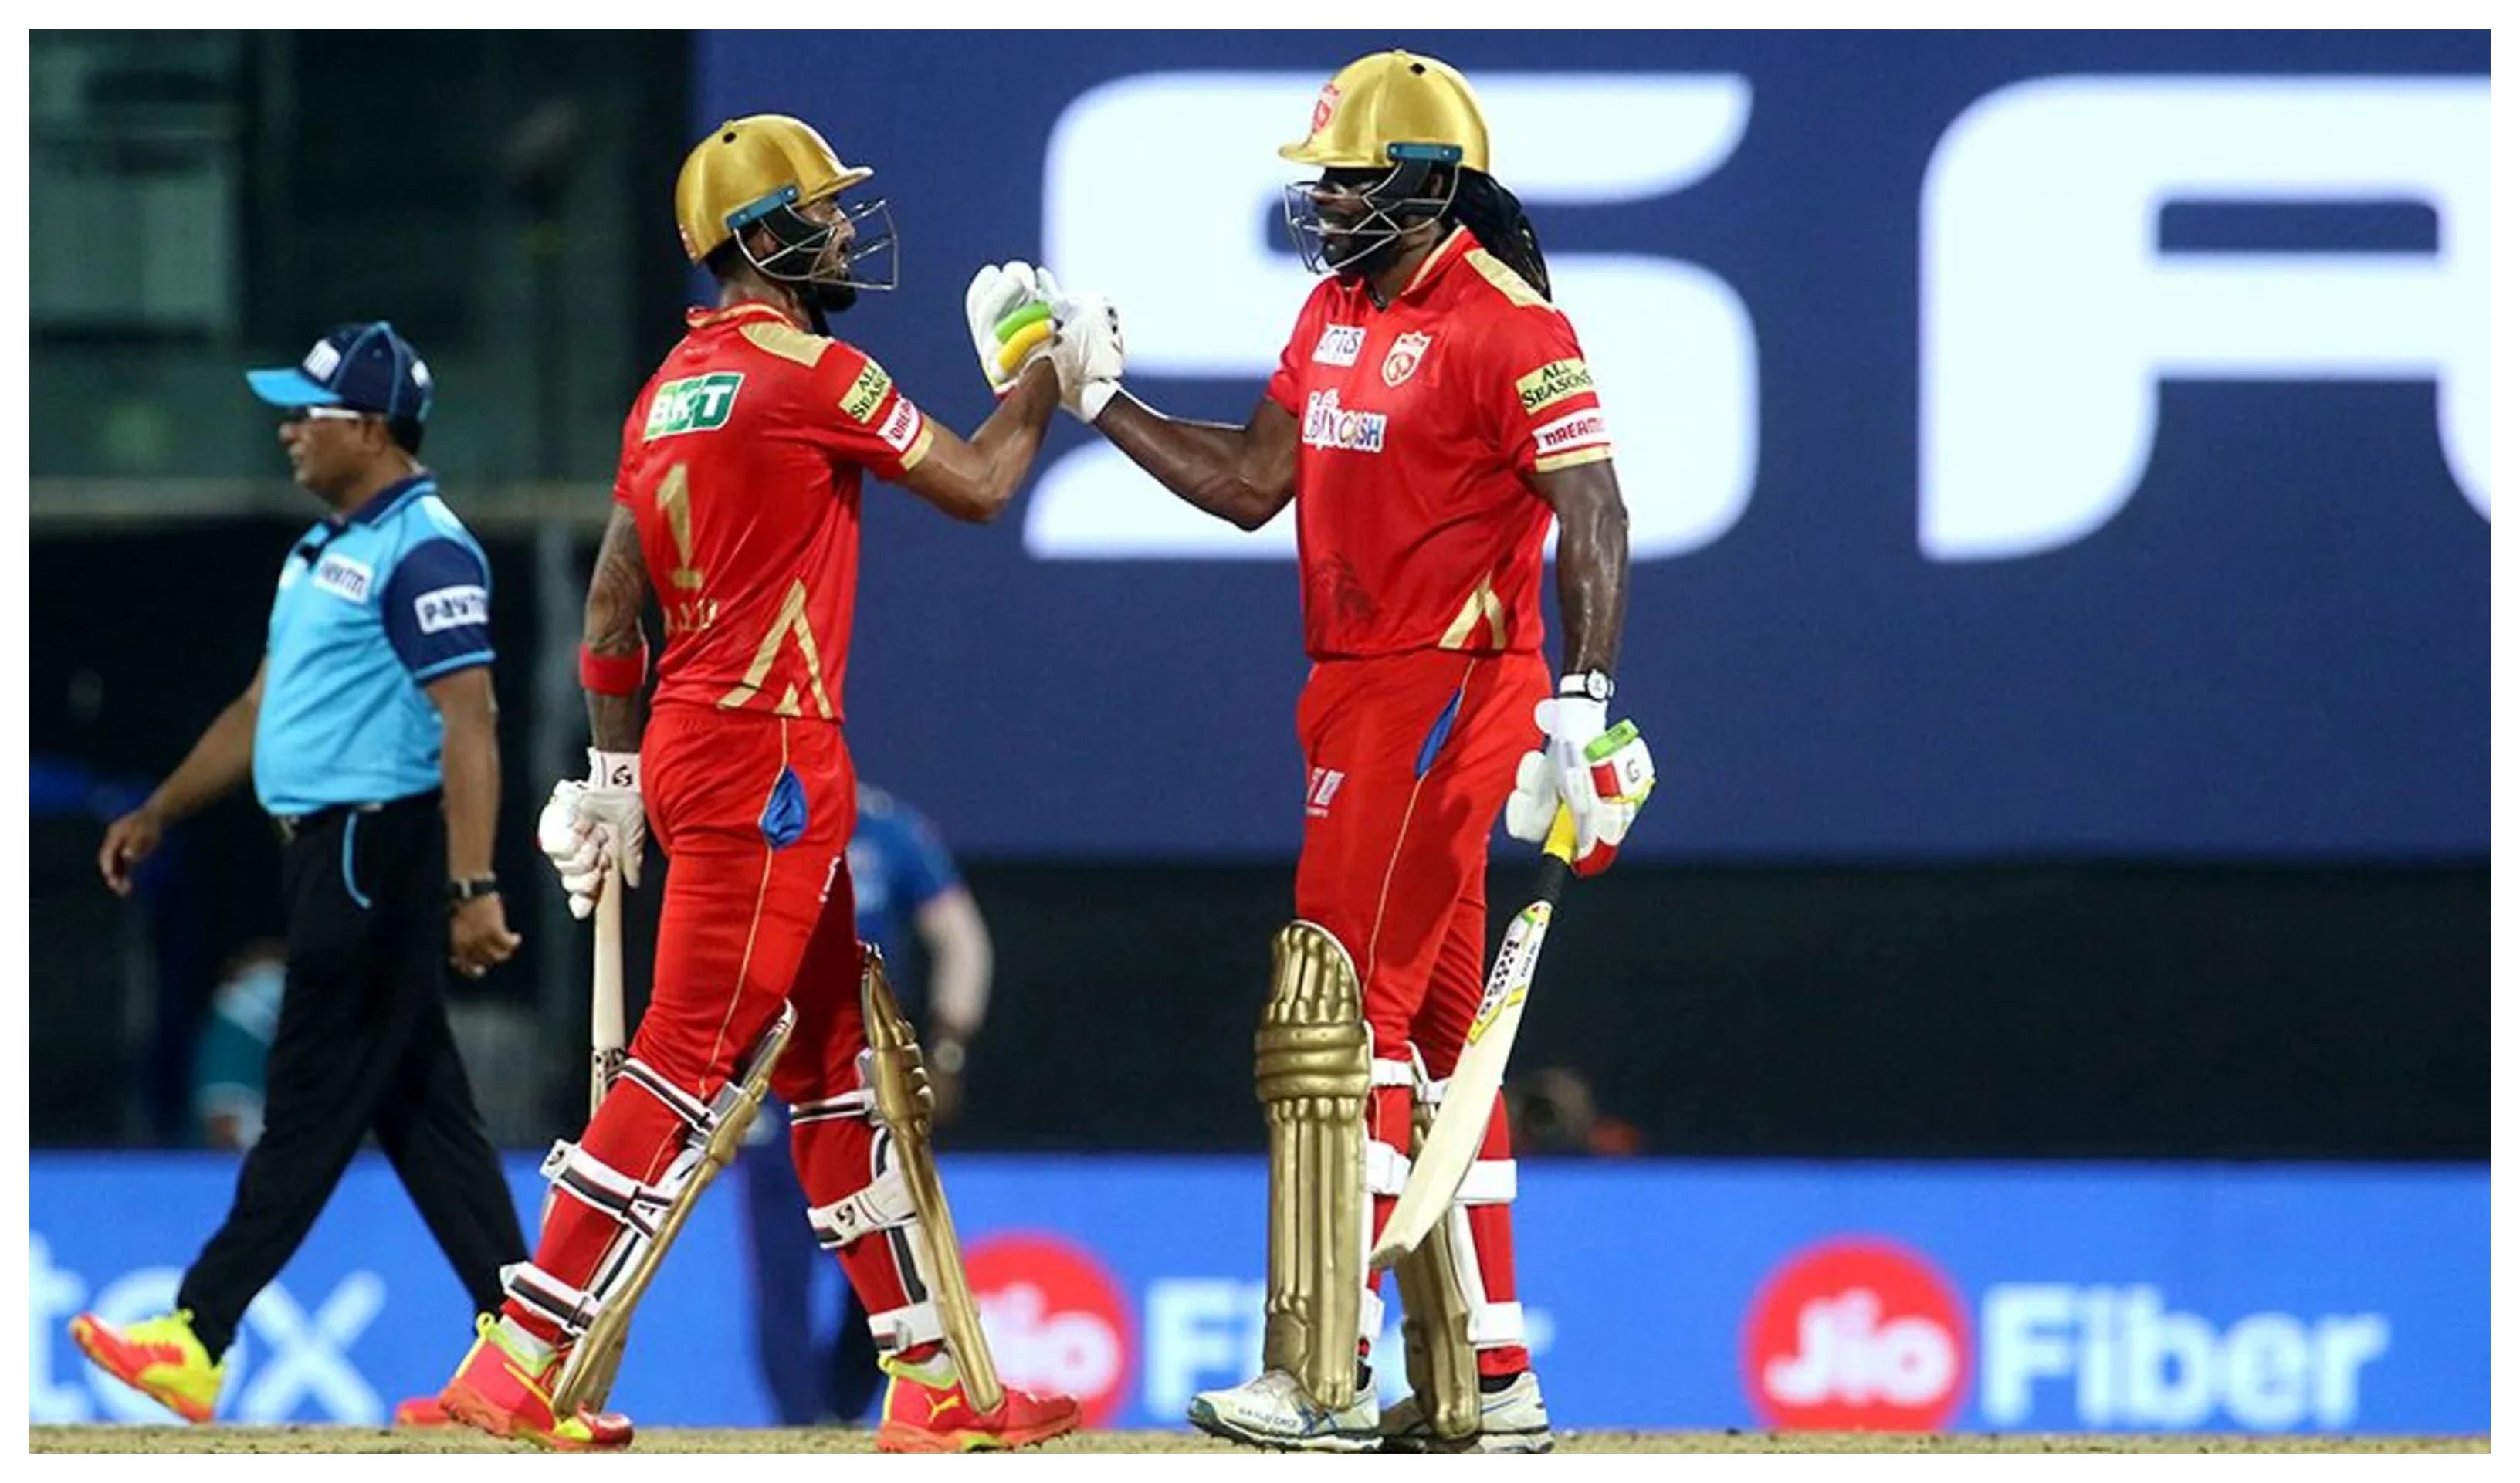 PBKS defeated MI by 9 wickets in a low-scoring affair | BCCI/IPL